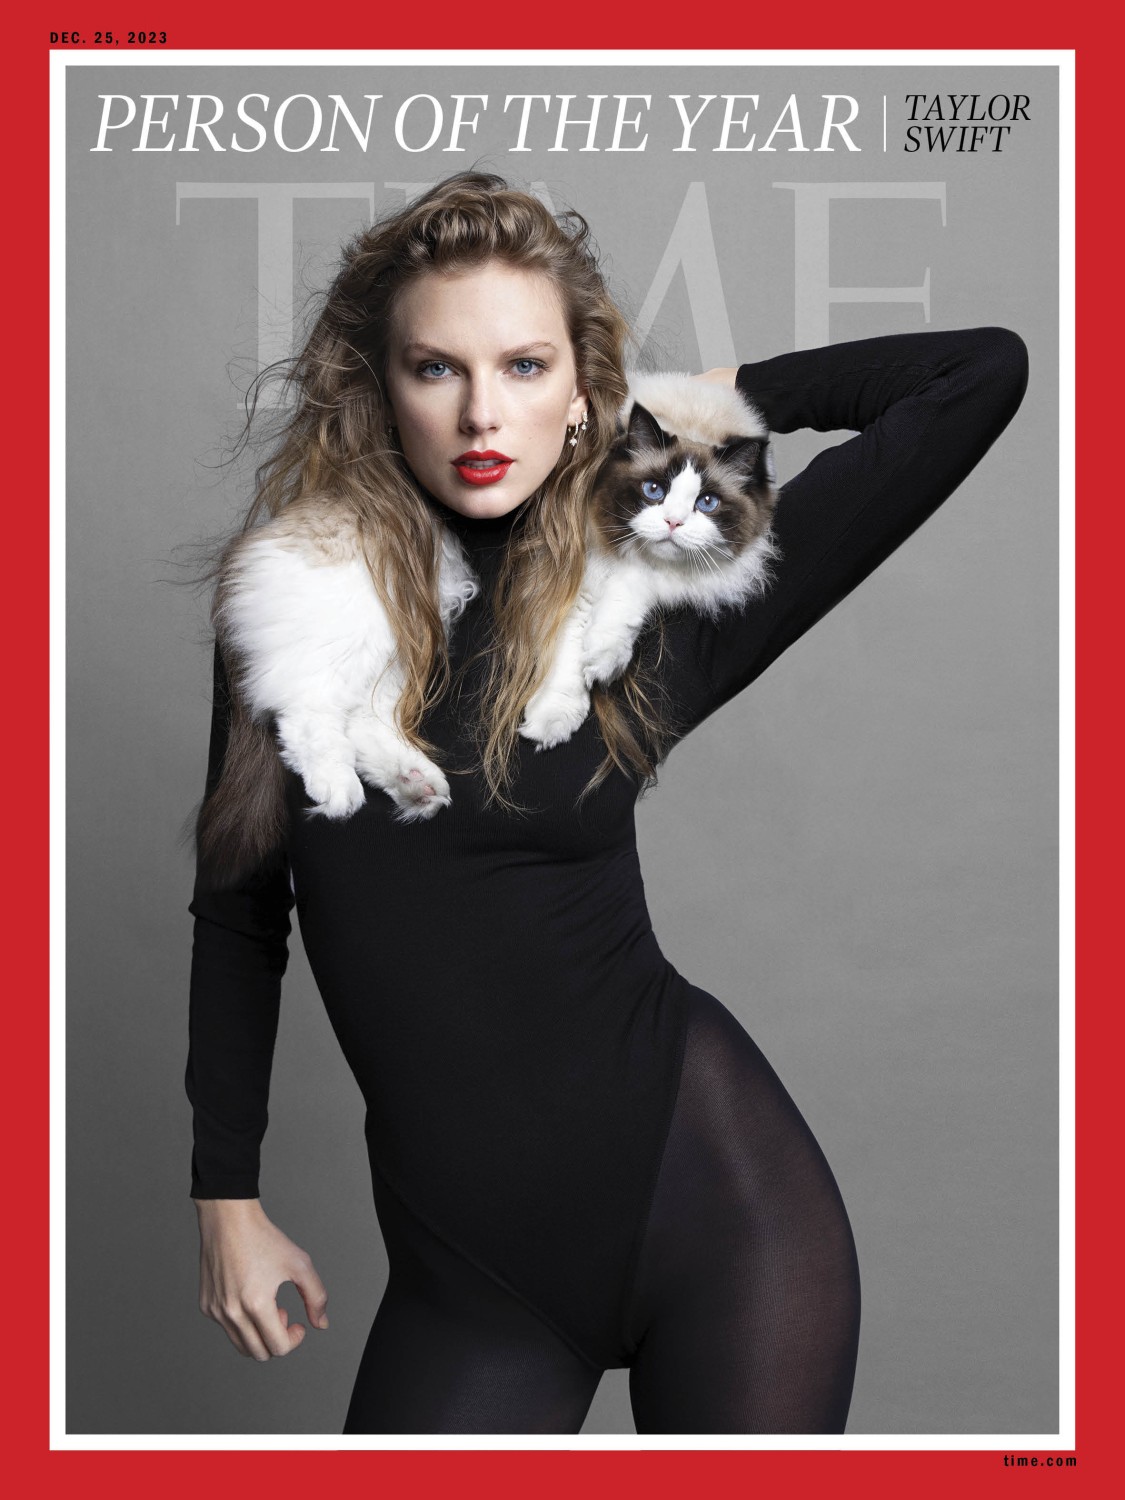 SWIFT FINAL COVER3